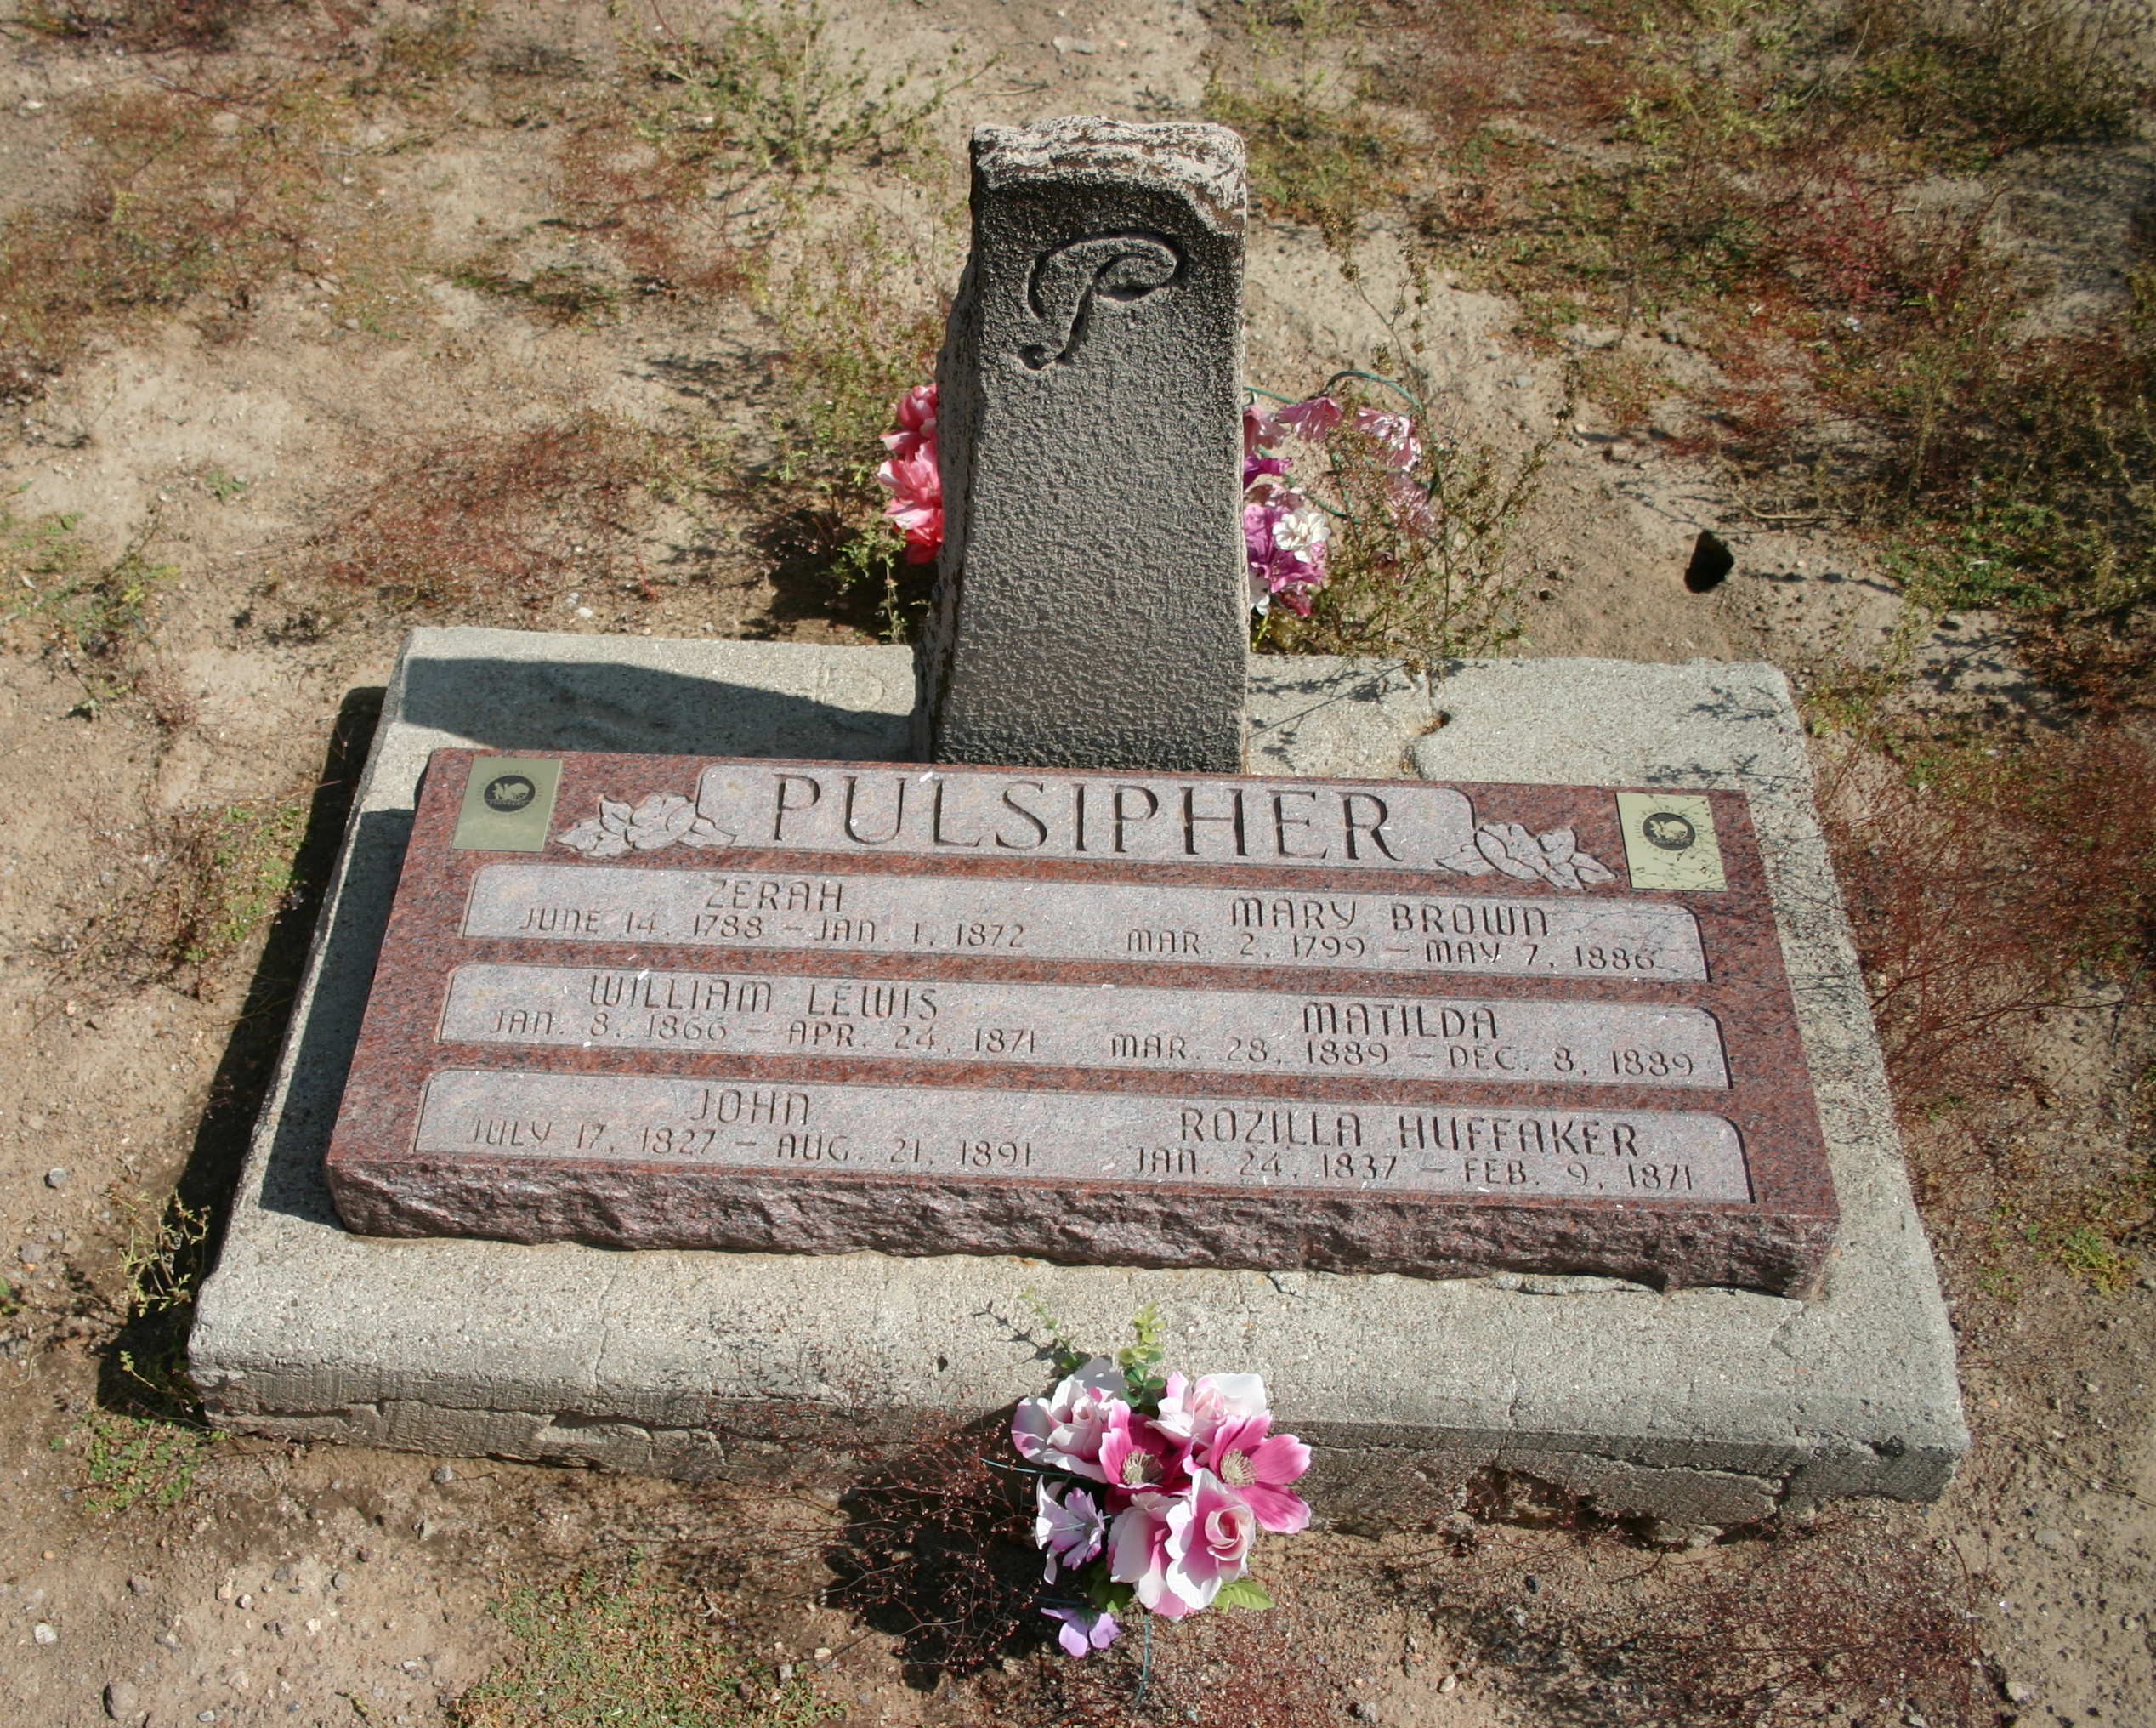 Pulsipher family gravestone at the Hebron Cemetery